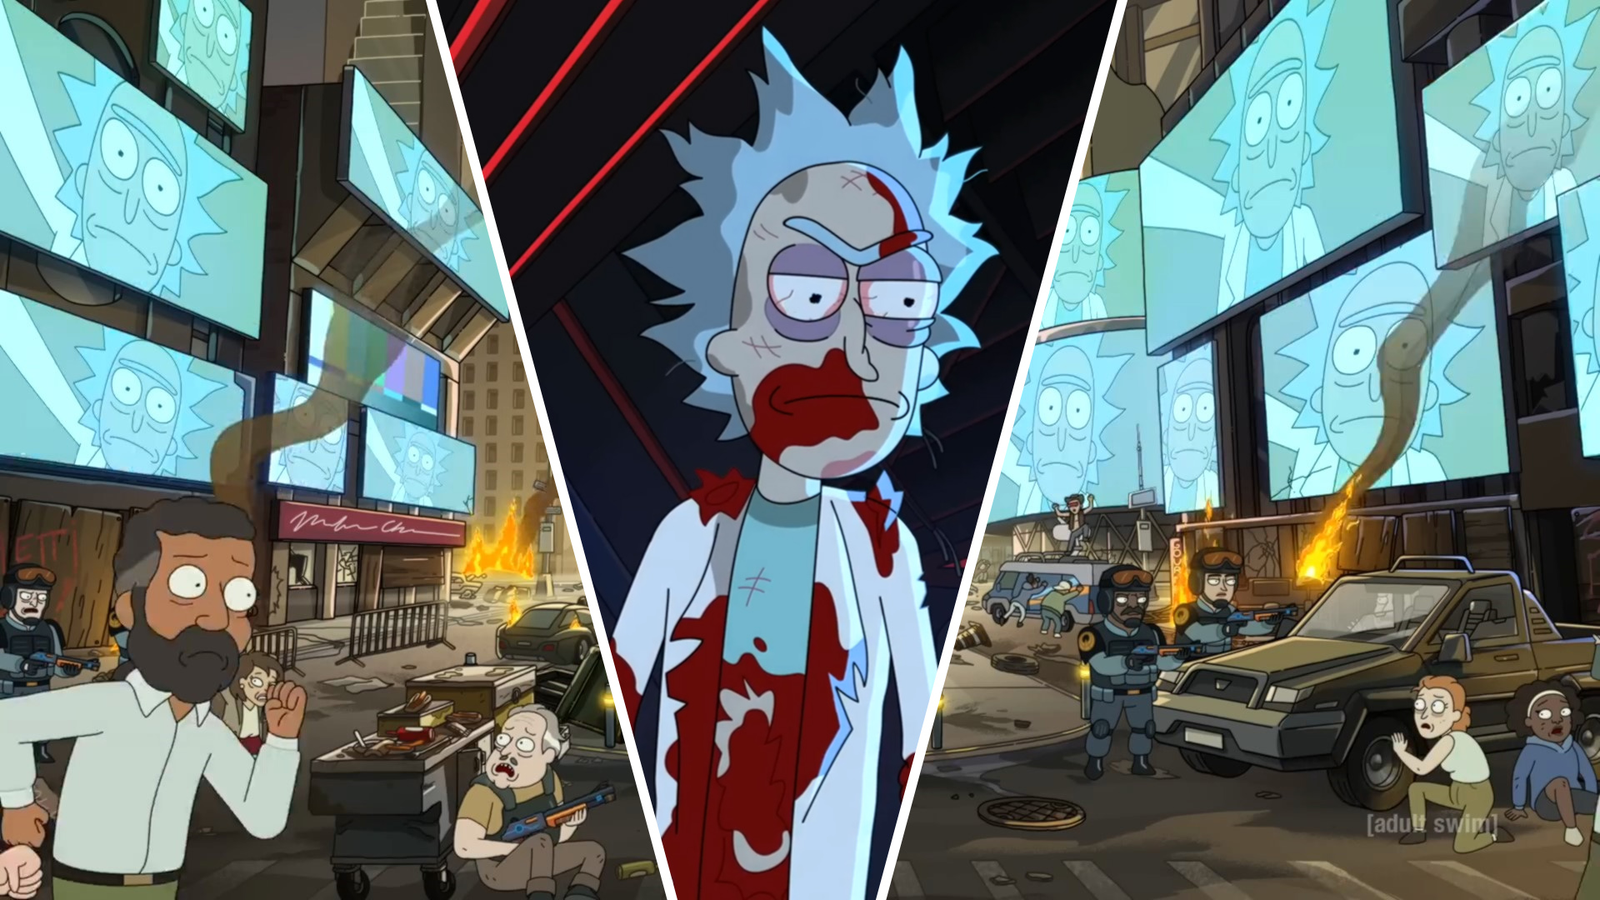 Rick and Morty Season 7 suffers on Rotten Tomatoes - Dexerto